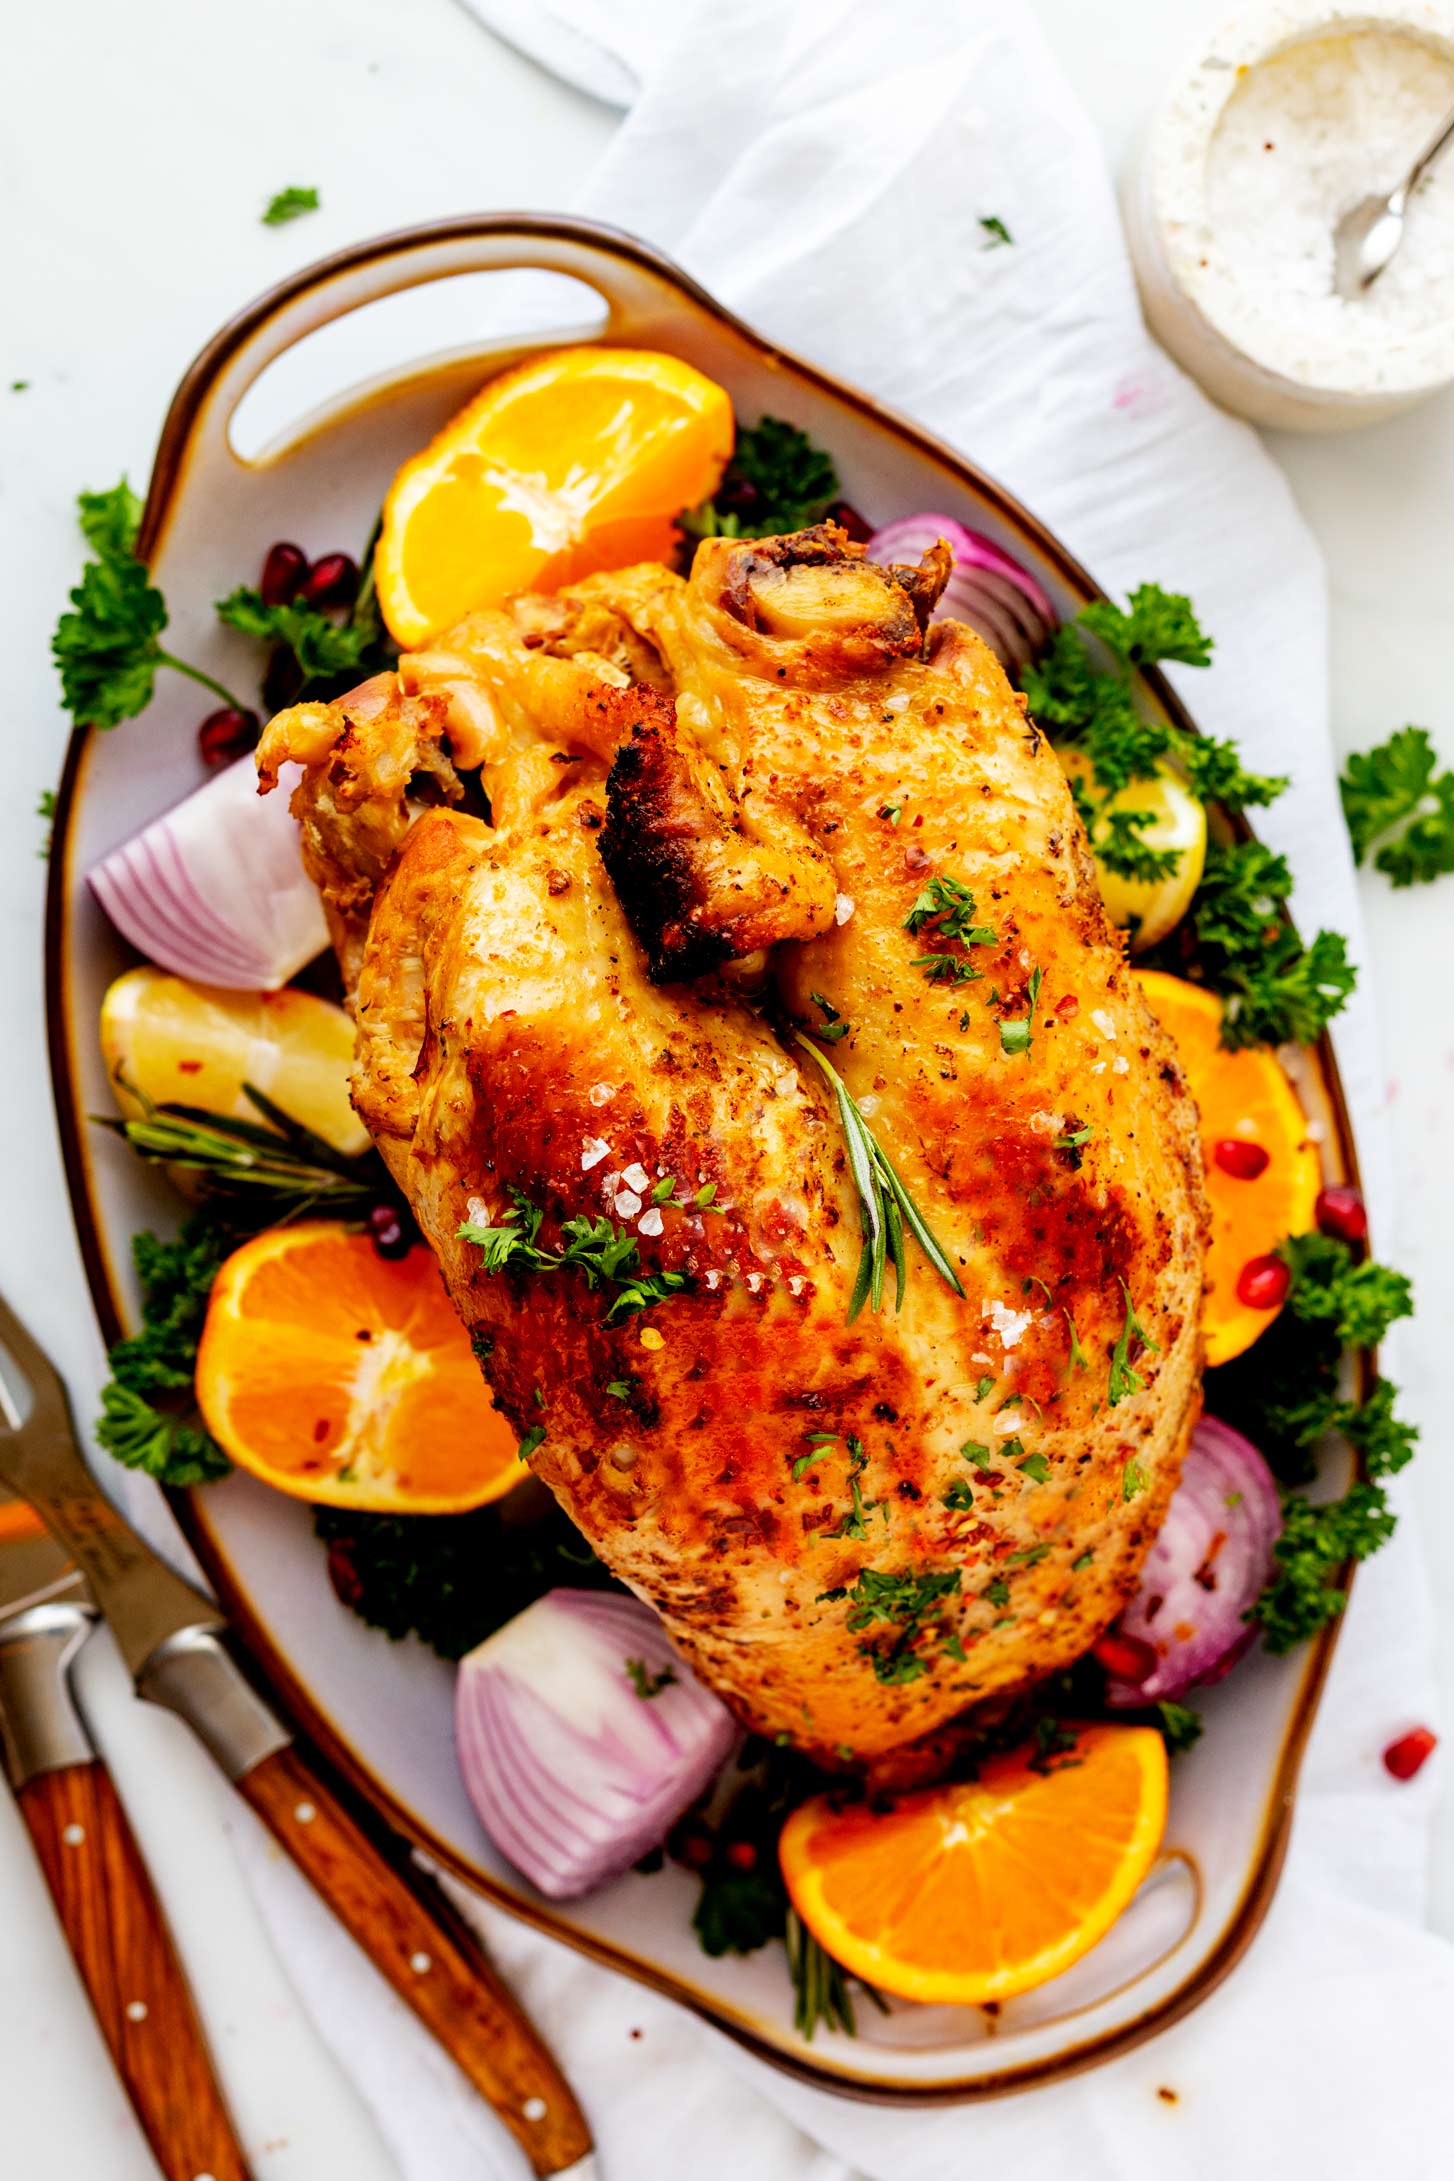 Overhead photo of a crockpot turkey breast on a serving platter surrounded by onion, parsley, lemon, and orange with carving knives next to it.